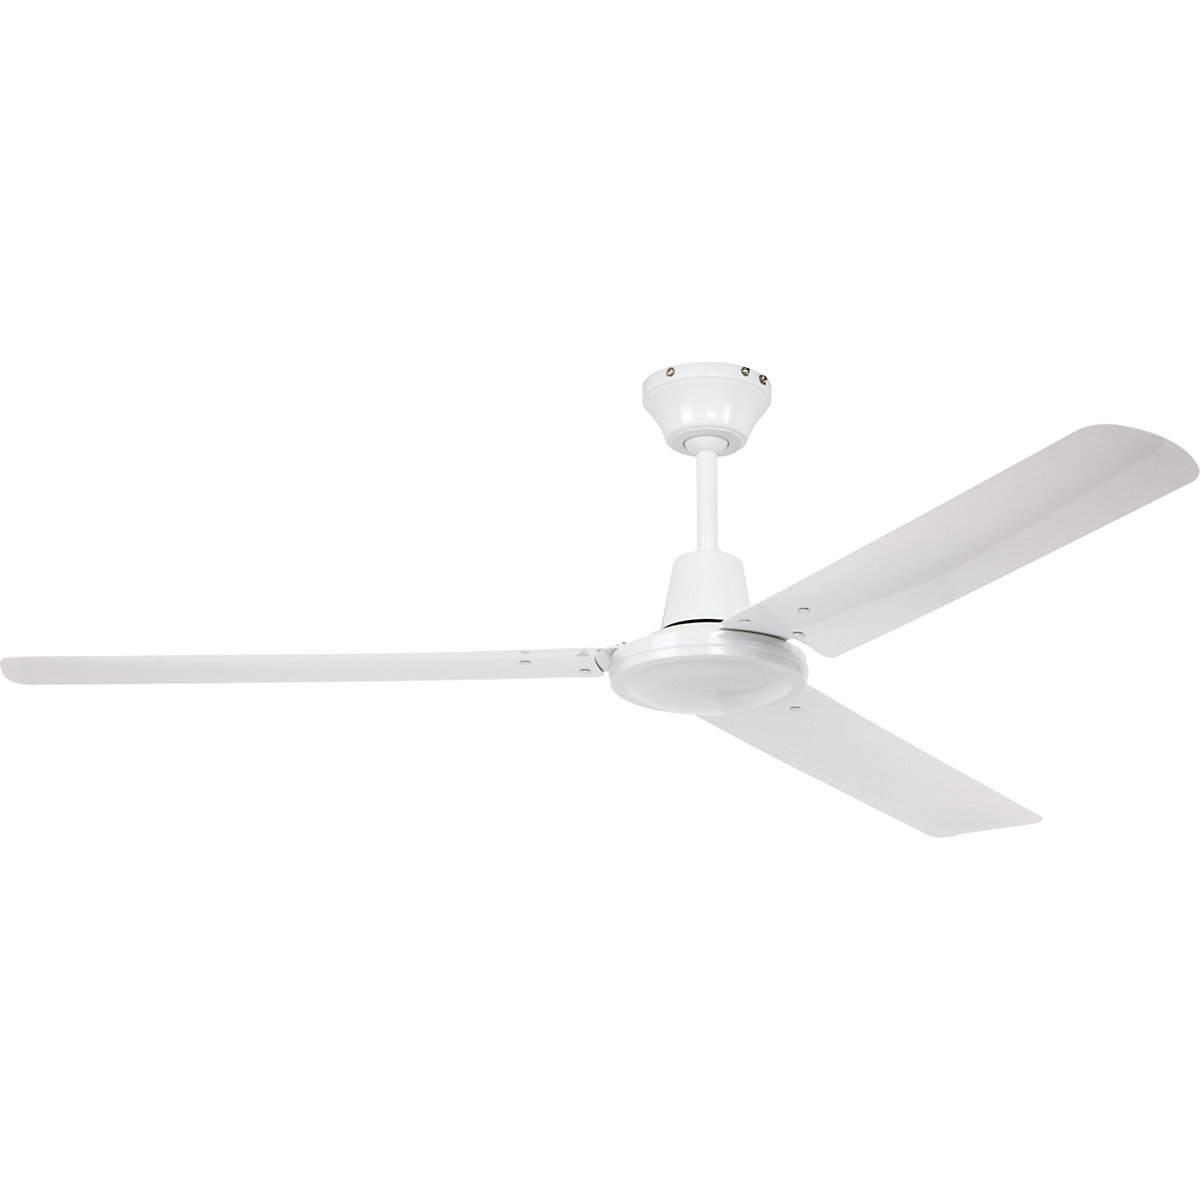 Ceiling fan with metal blades